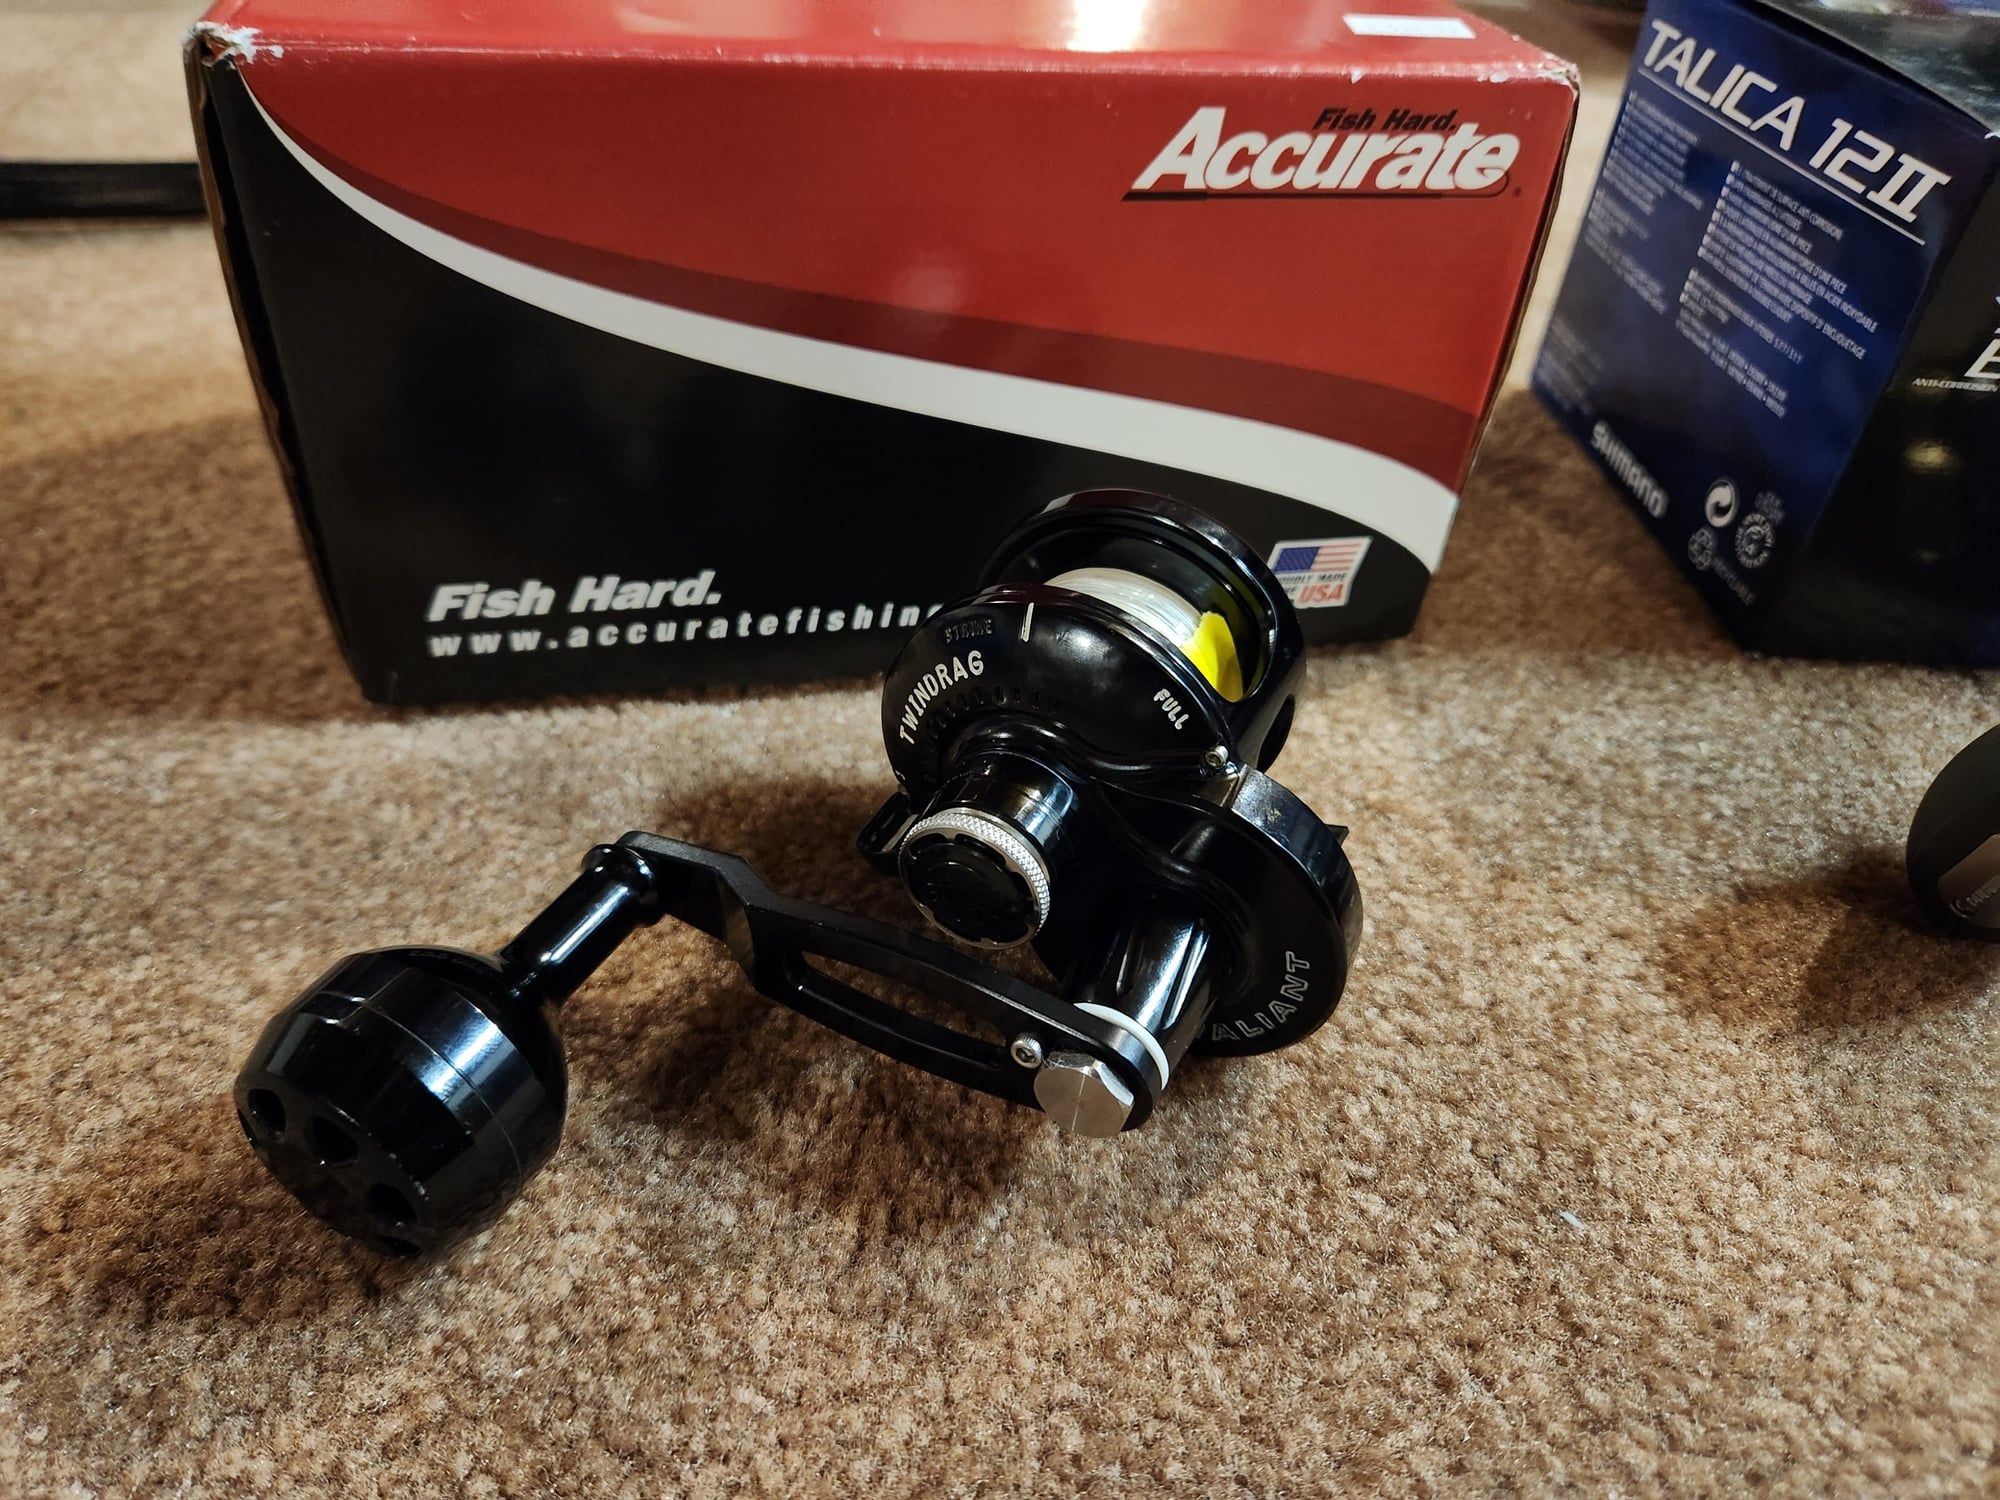 Shimano, Accurate reels, g loomis and Phenix rods - The Hull Truth -  Boating and Fishing Forum